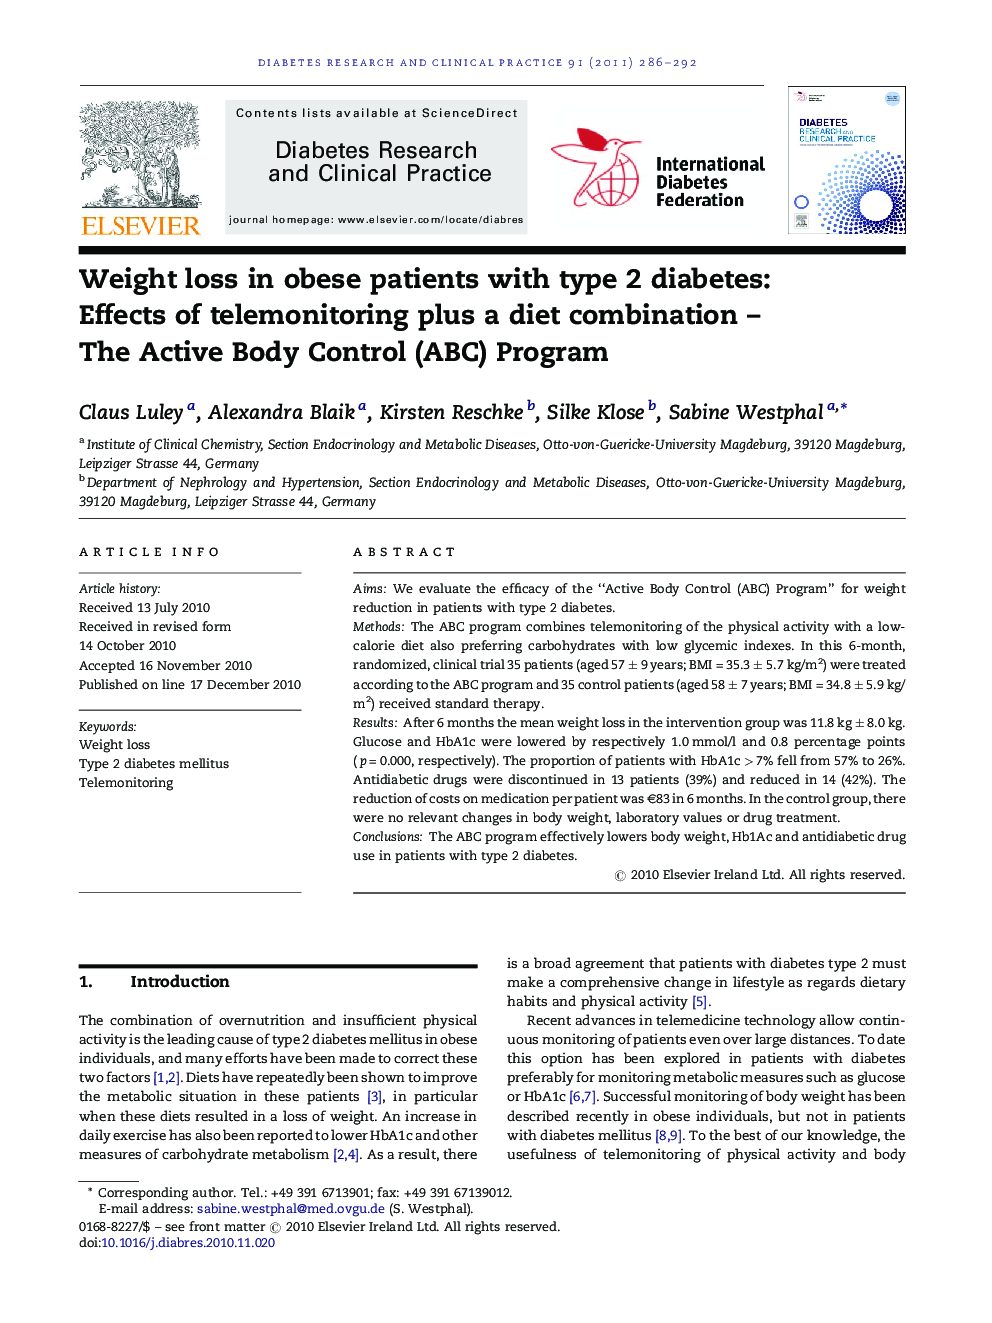 Weight loss in obese patients with type 2 diabetes: Effects of telemonitoring plus a diet combination - The Active Body Control (ABC) Program